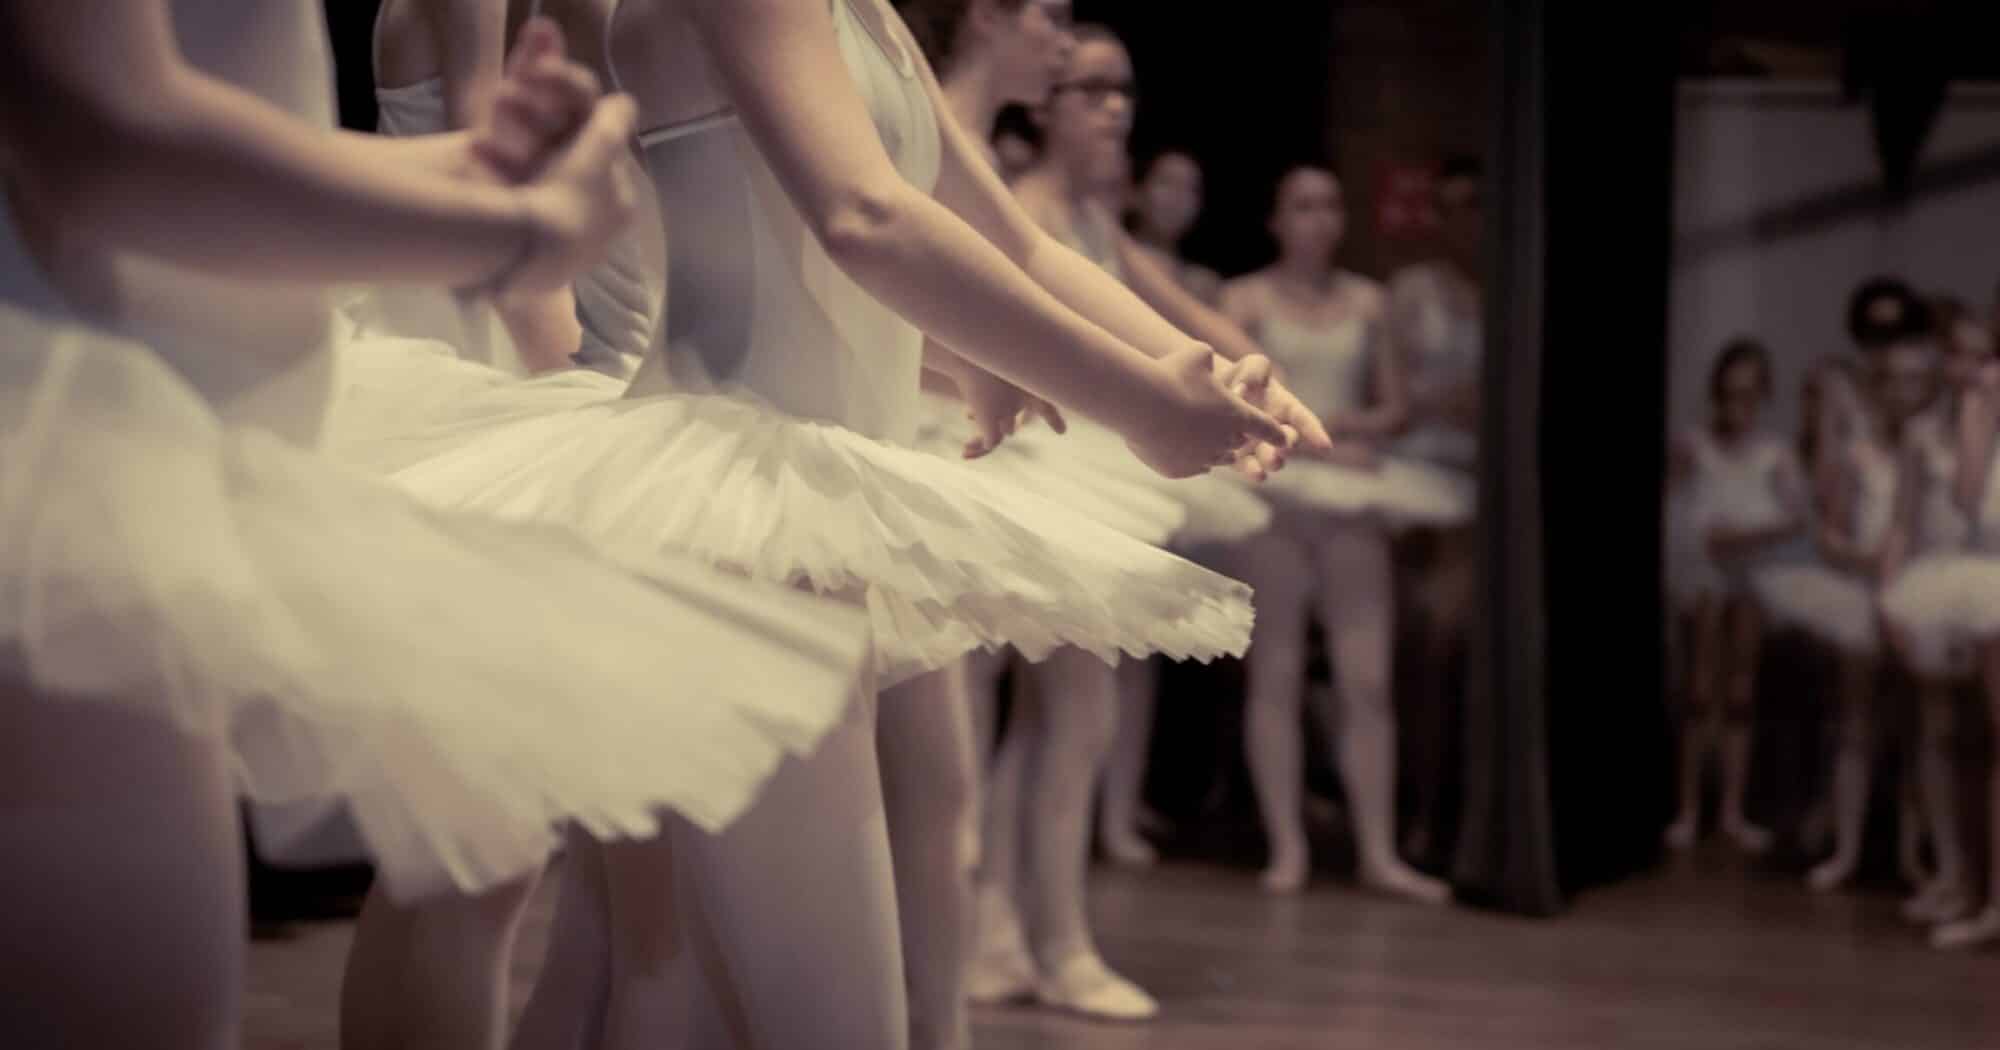 Young dancers practicing in a ballet class.